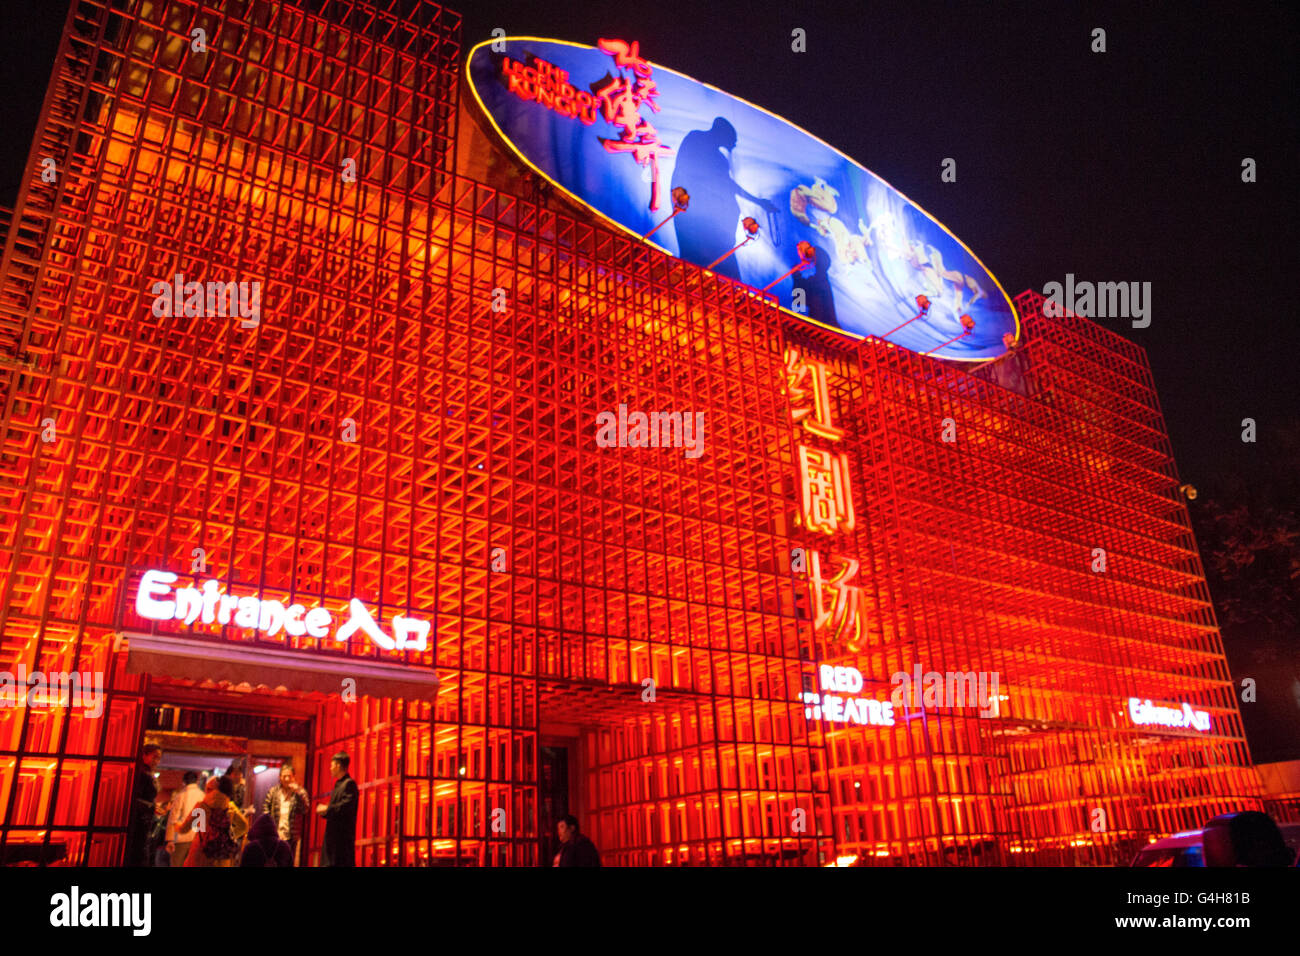 Løve sovjetisk statisk The legend of Kung Fu Show advertised at the Red Theatre Beijing China  Asia. red building facade Stock Photo - Alamy